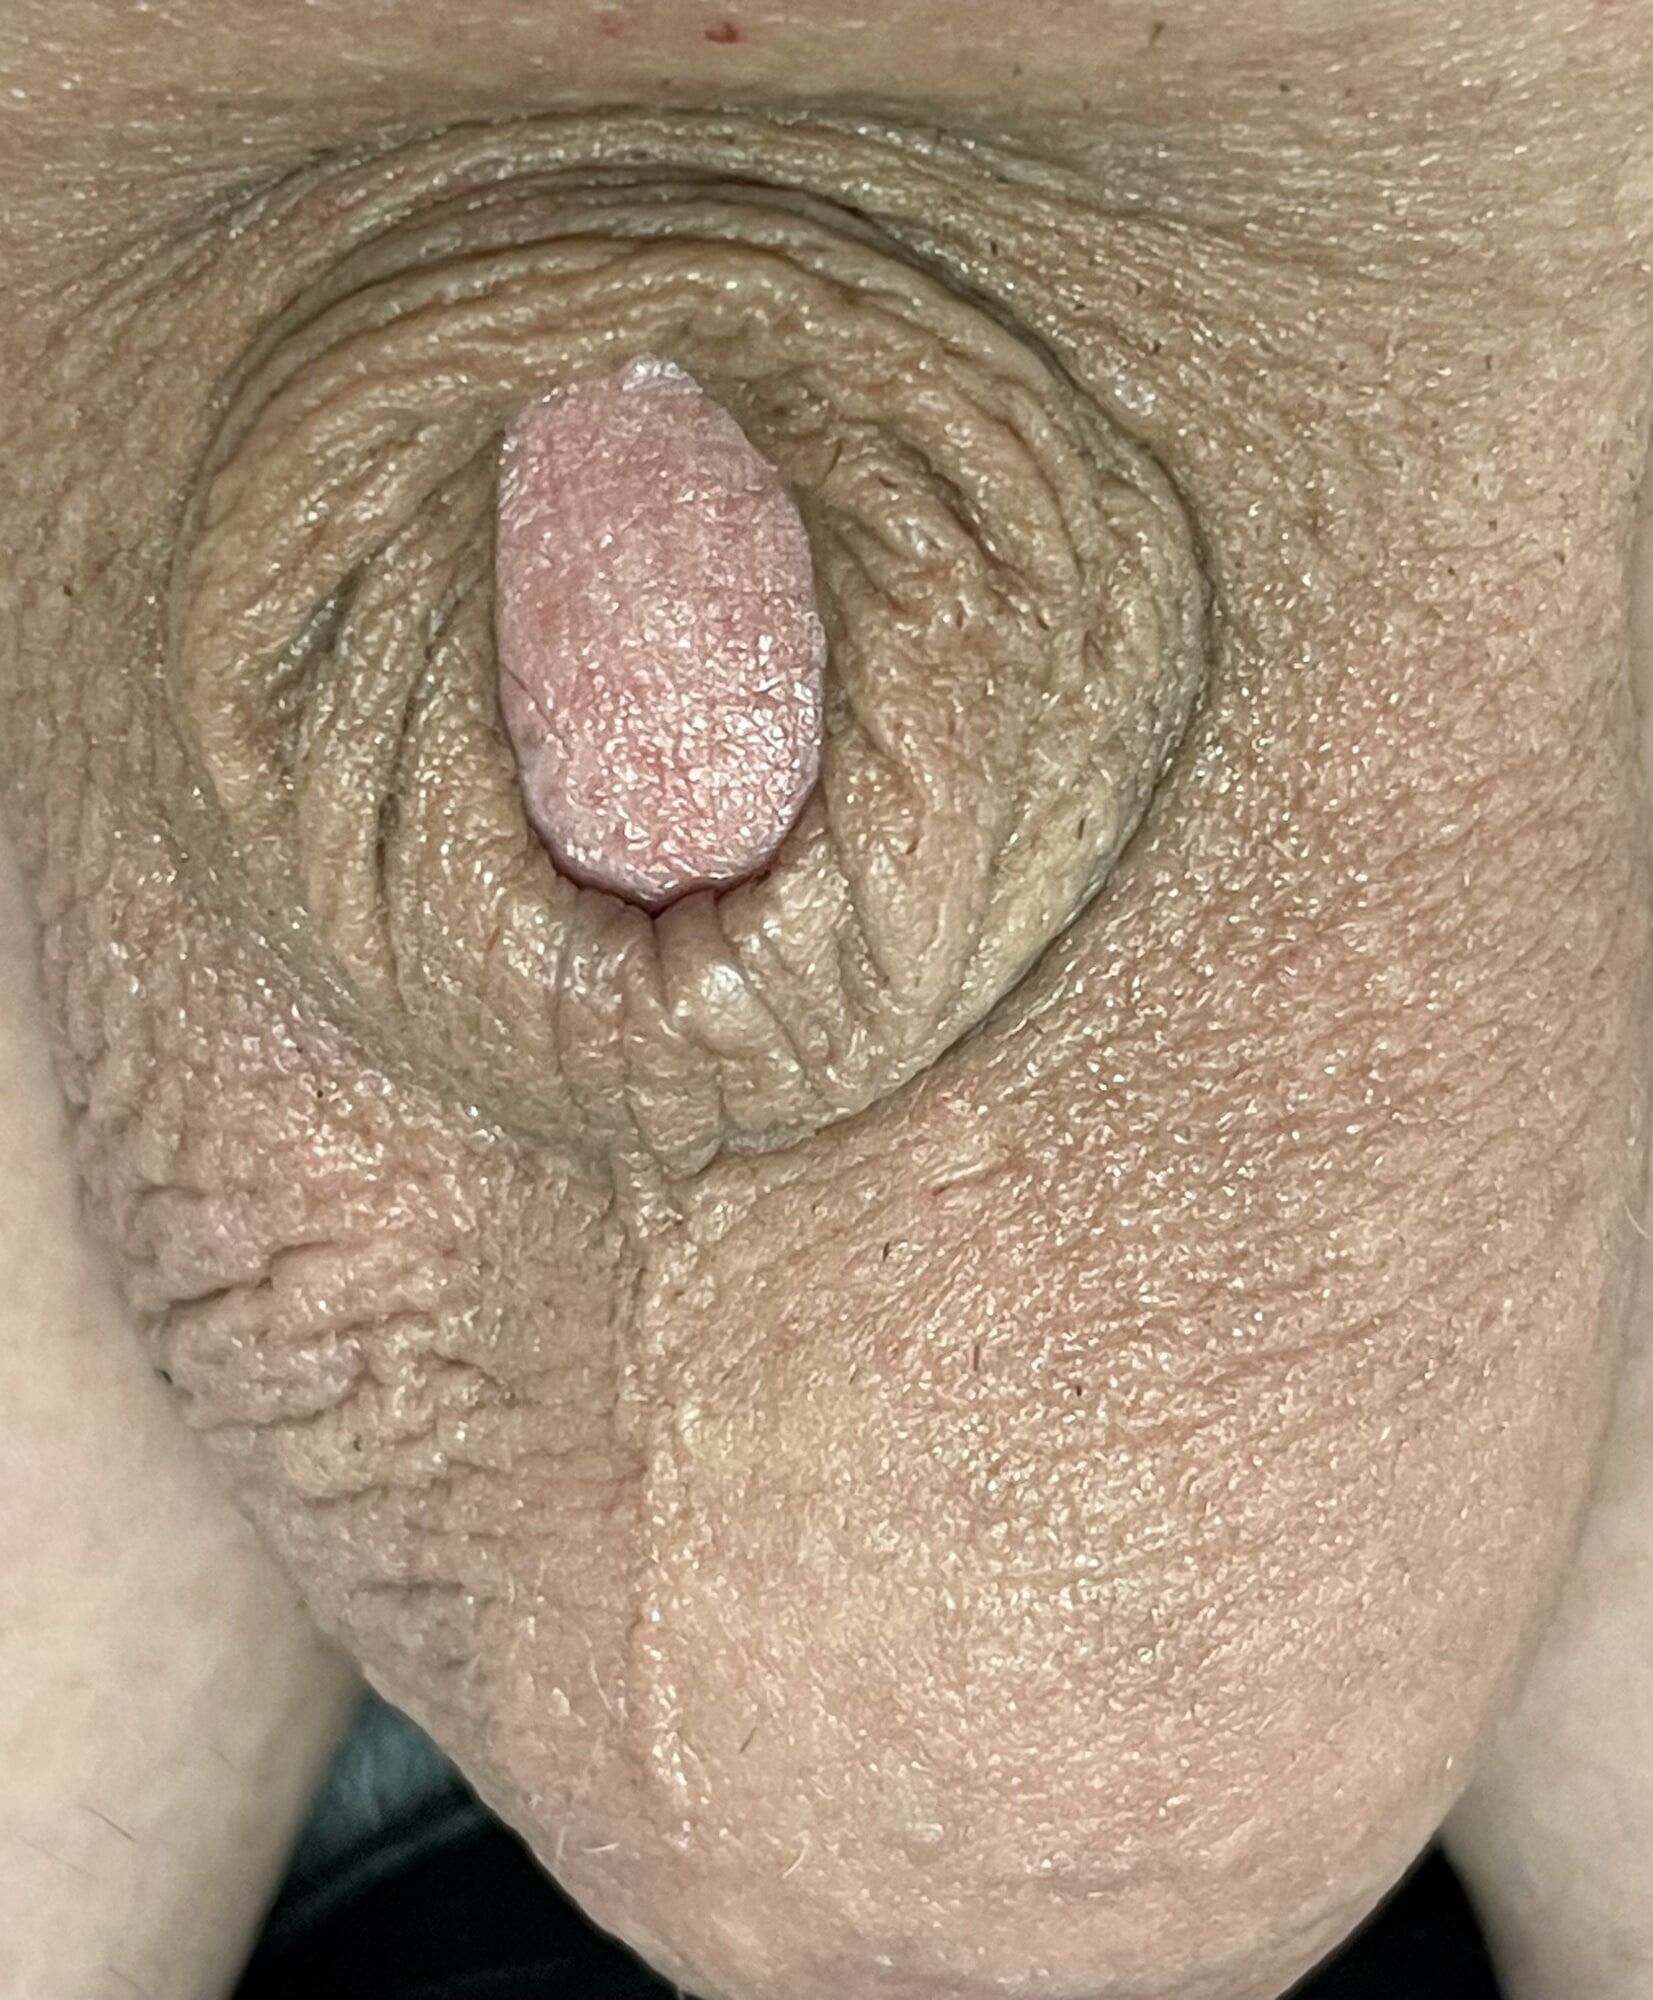 Micropenis close up #12